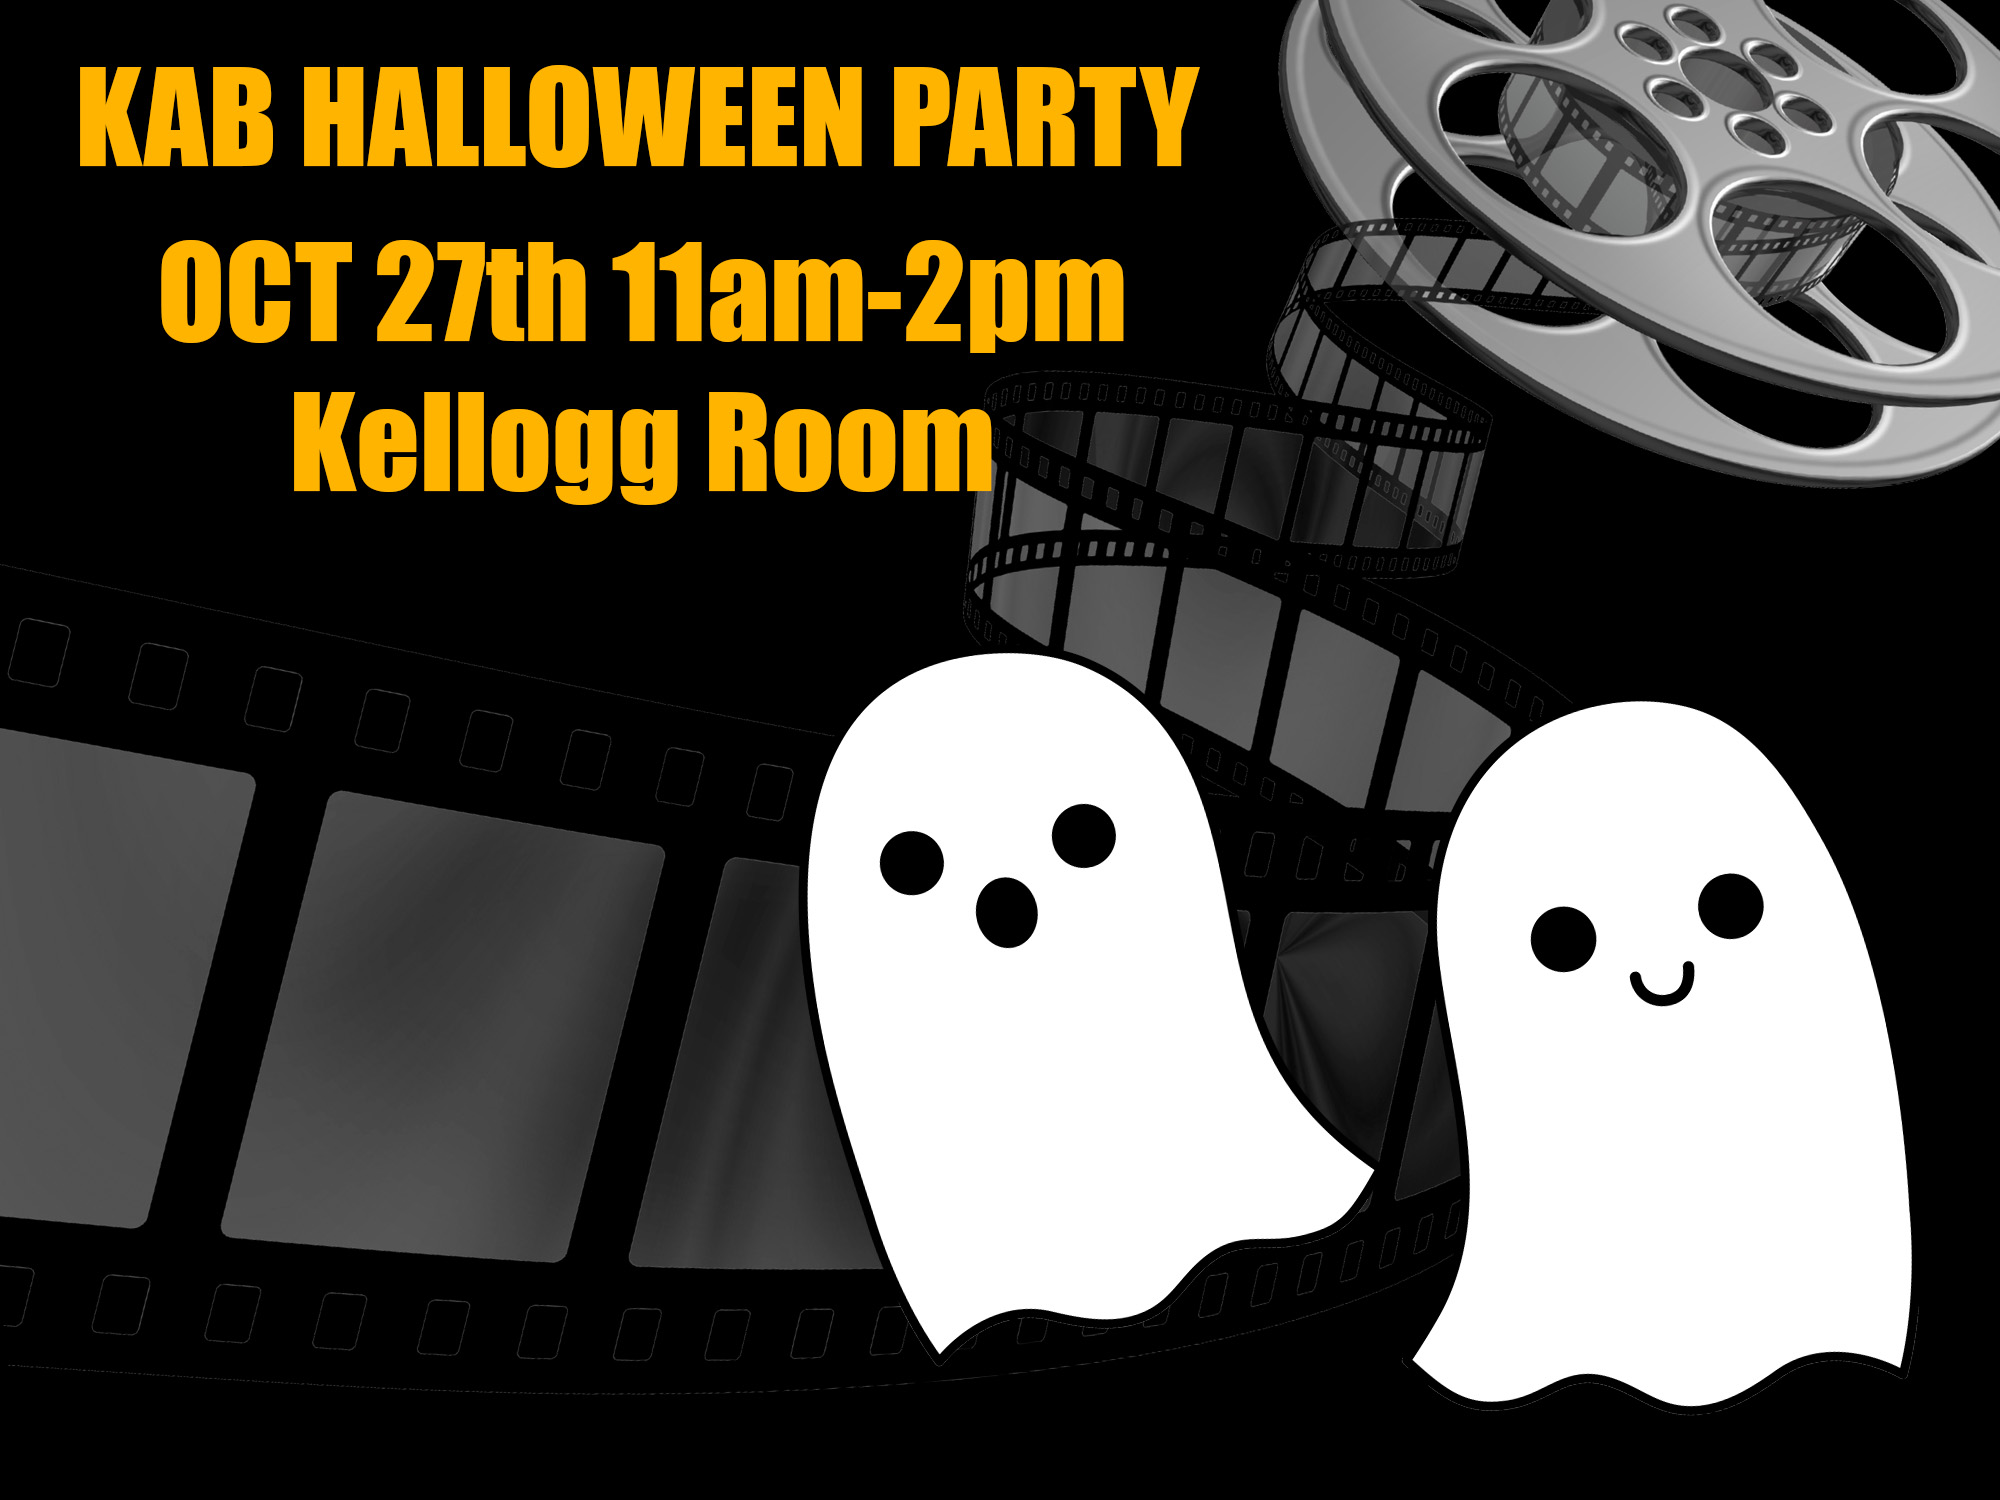 Party invitation with ghosts and movie film.